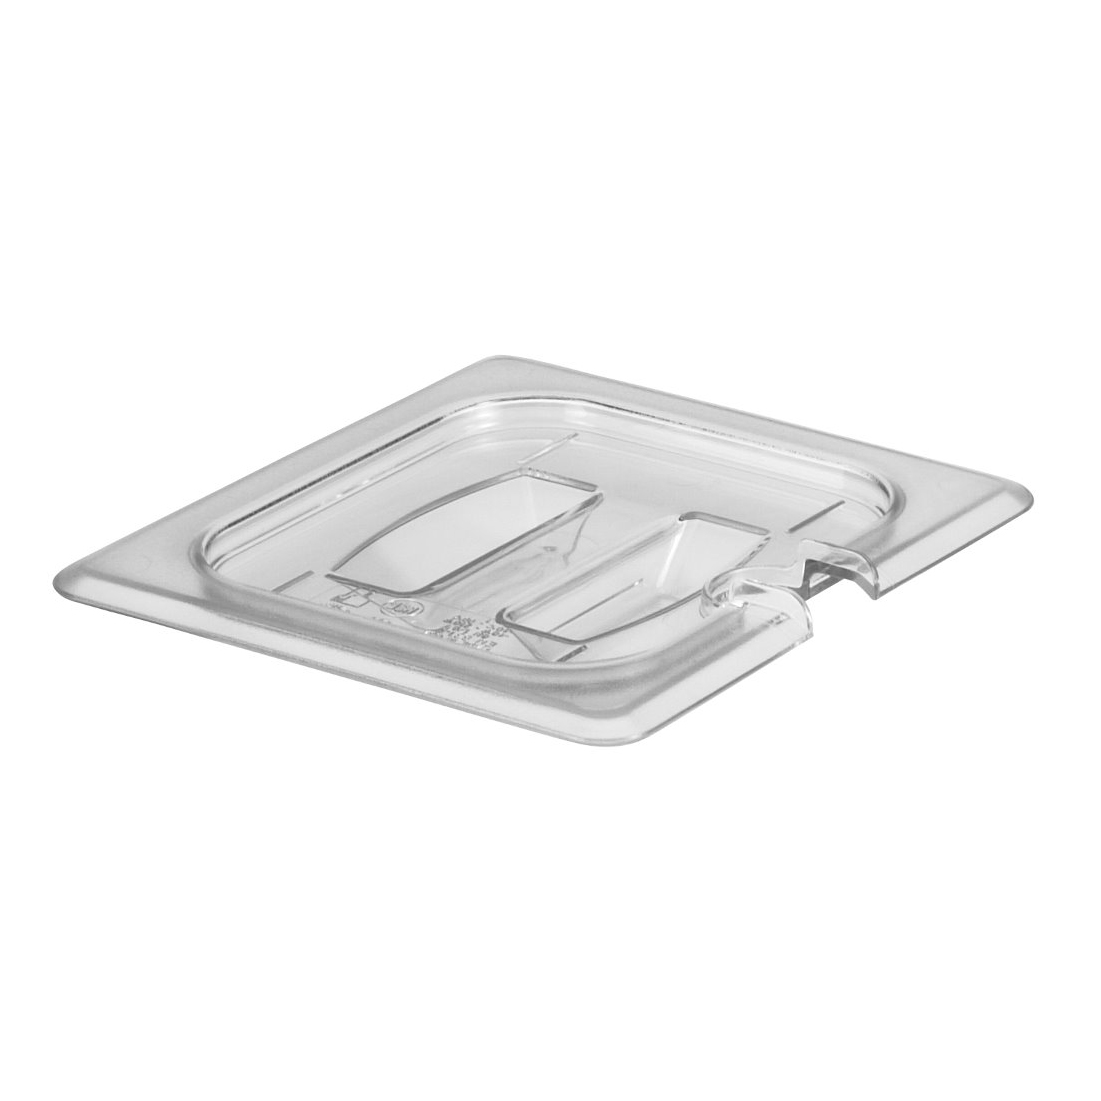 Cambro 60CWCHN135 Camwear Food Pan Cover, 1/6 size, notched, with handle, polycarbonate, clear, NSF